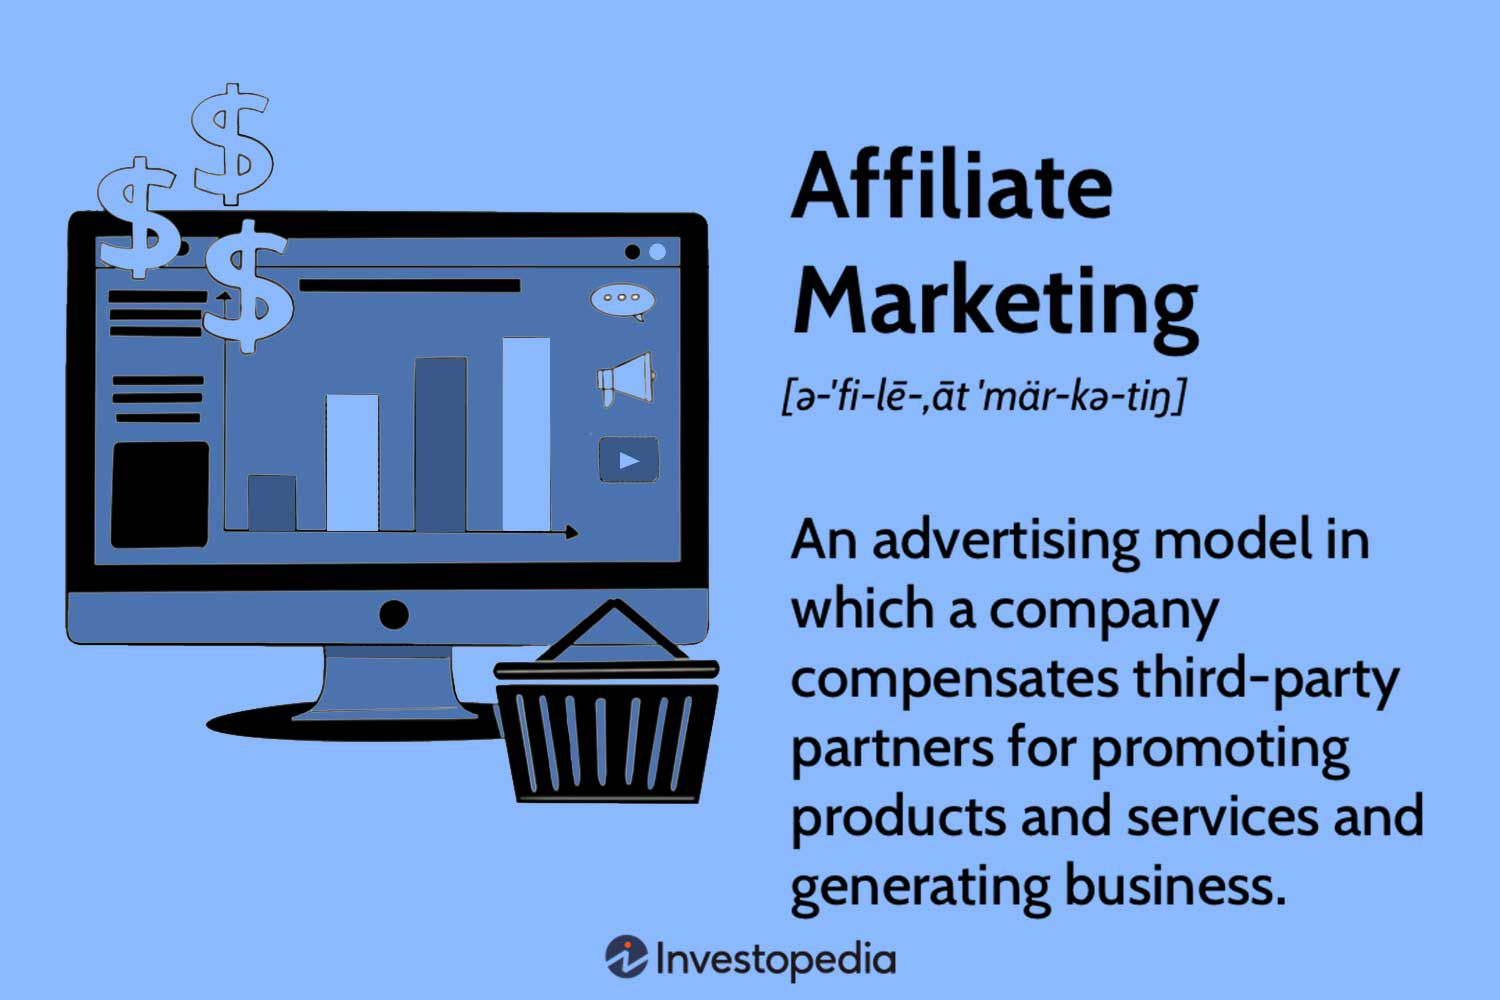 An infographic that defines affiliate marketing as 'an advertising model in which a company compensates third-party partners for promoting products.'